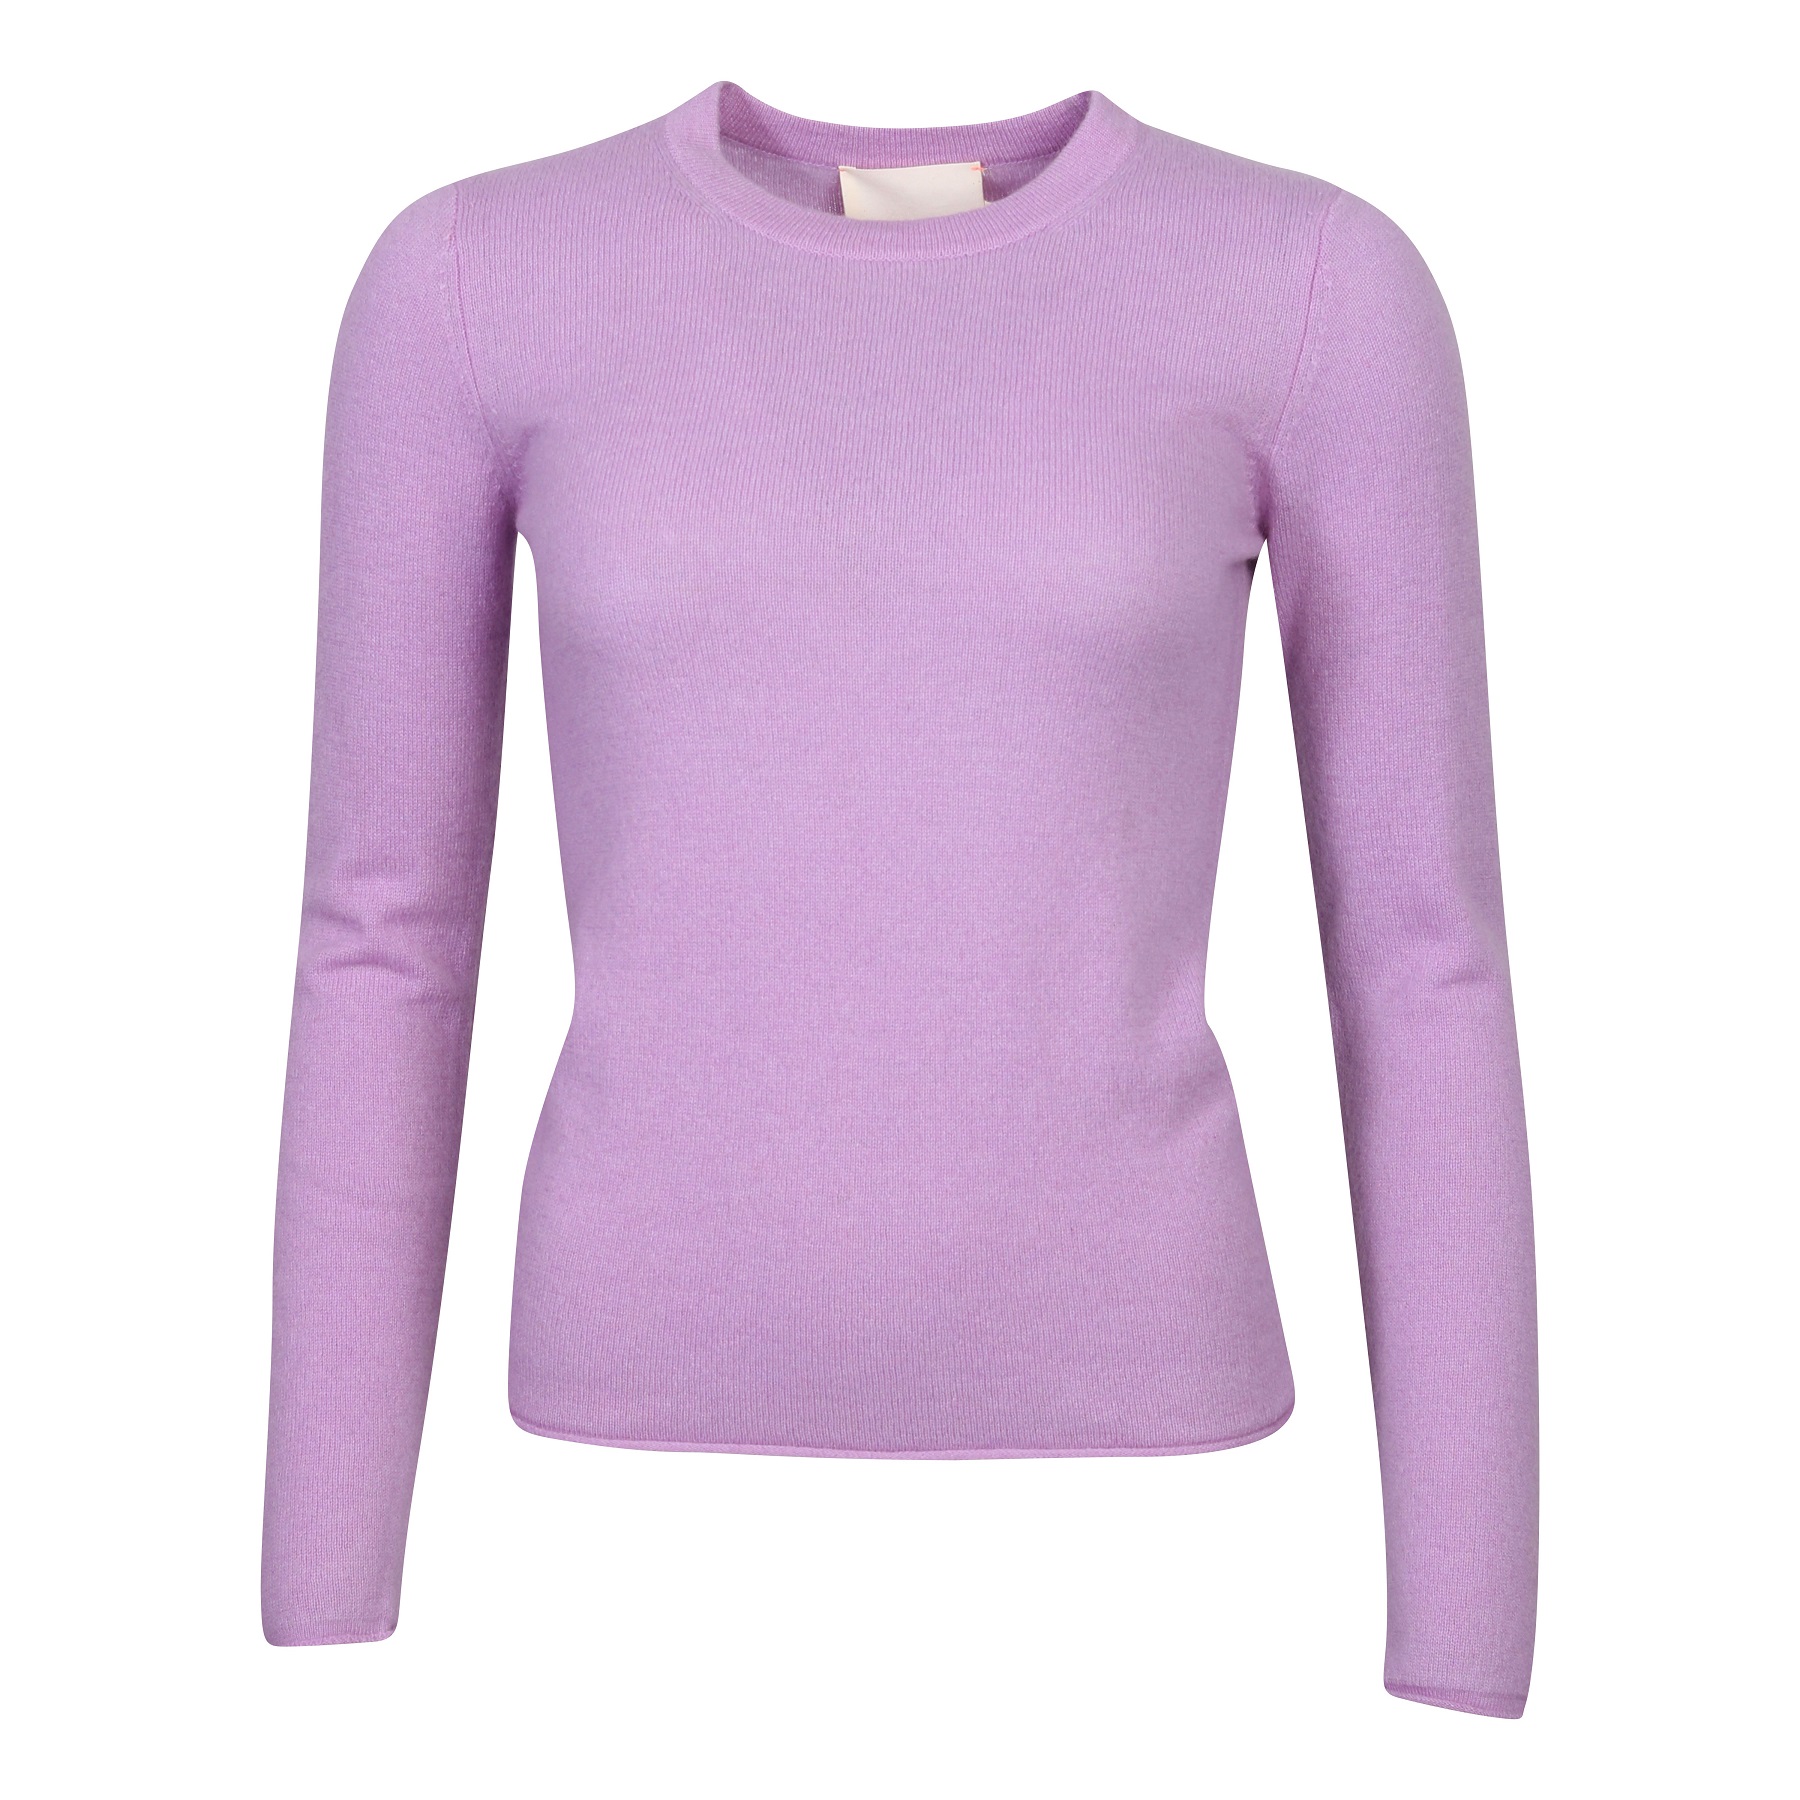 Absolut Cashmere Fitted Pullover in Lilac S